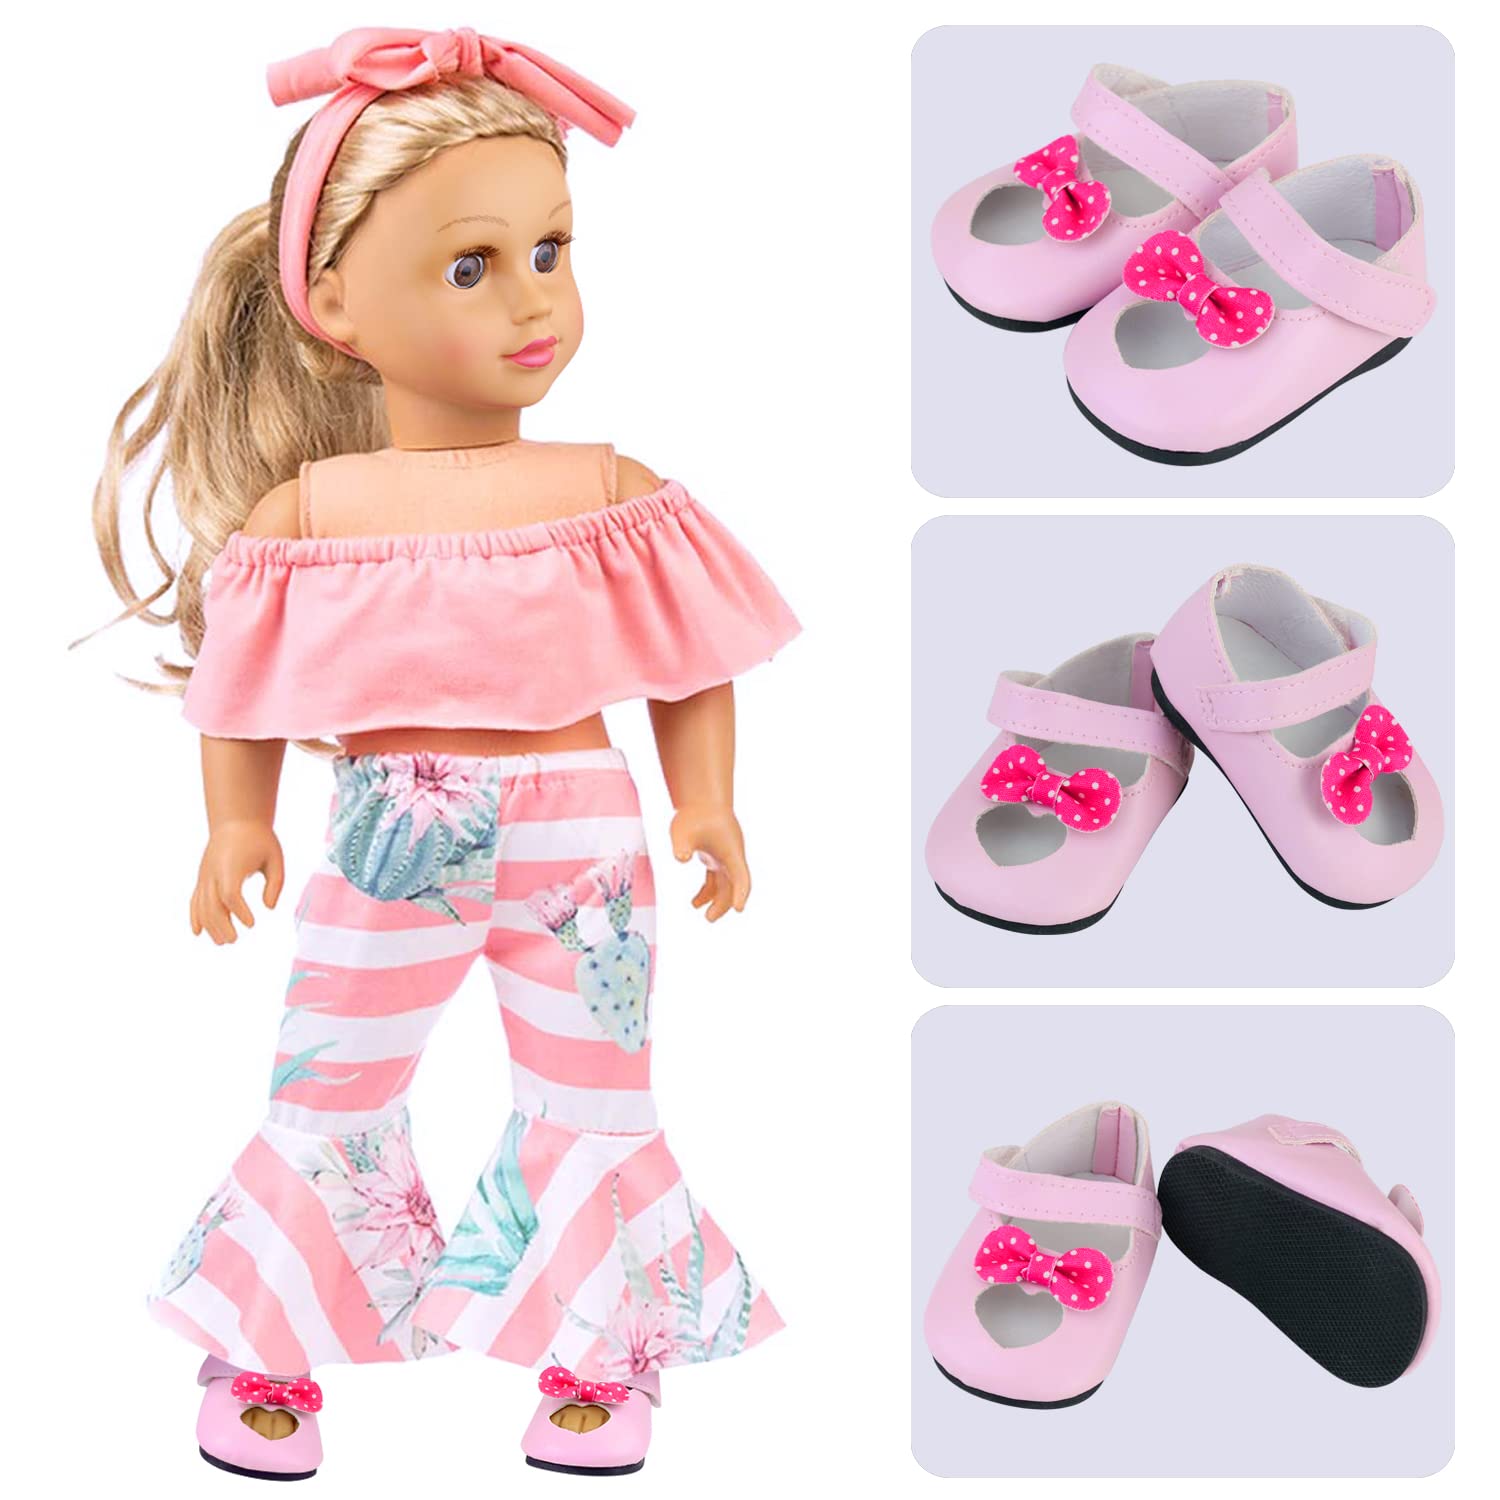 Ecore Fun 18 inch Girl Doll Accessories Includes 9 Pairs of Shoes and 4 Pairs of Socks Fit for 18 Inch Girl Doll - Sandals, Casual Shoes, Canvas Shoes, Roller Skates ect